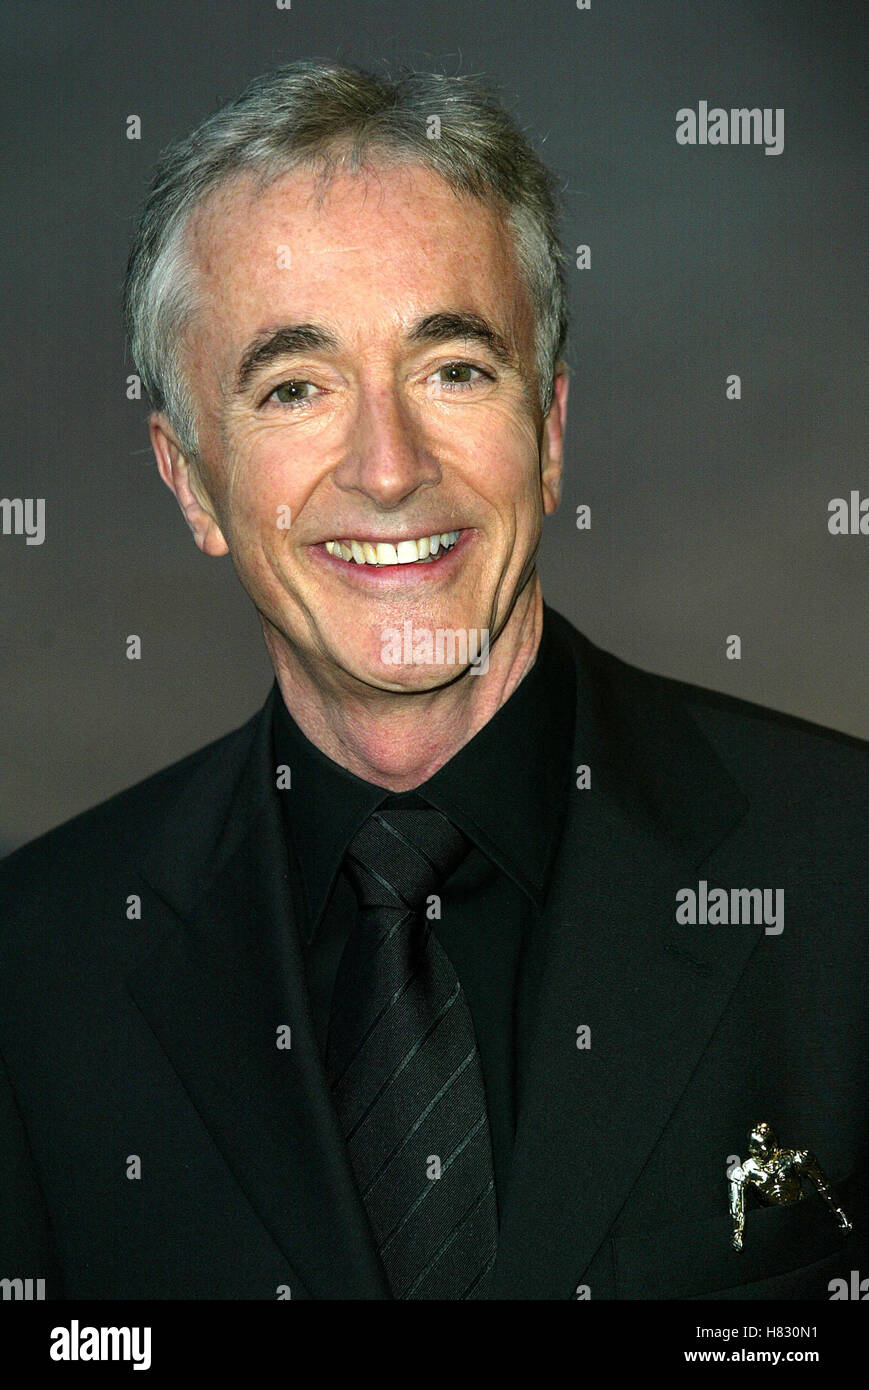 ANTHONY DANIELS STAR WARS PREMIERE LONDON ODEON LEICESTER SQUARE LONDON ENGLAND 14. Mai 2002 Stockfoto